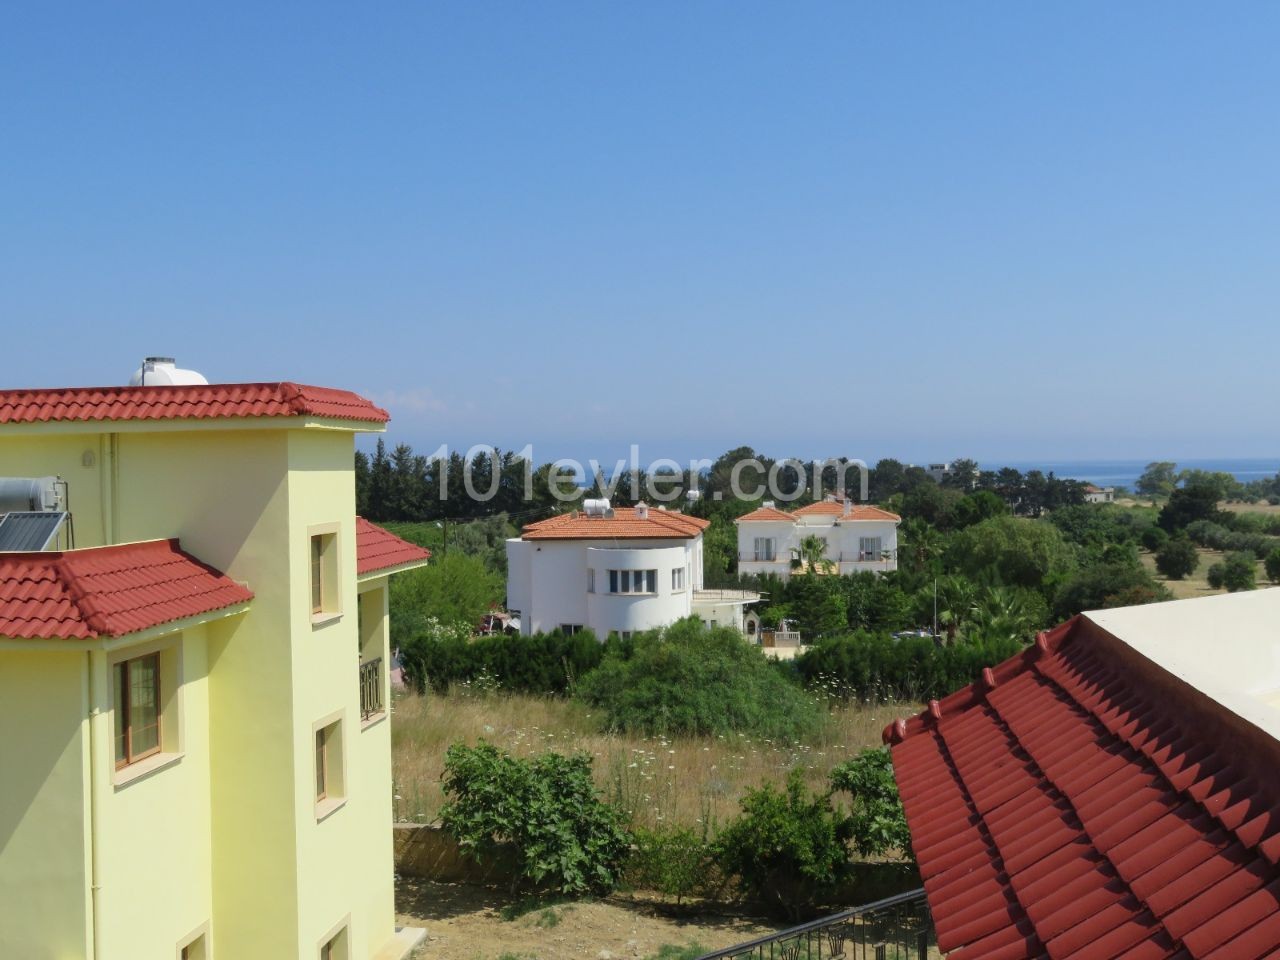 Karsiyaka 2 villas for sale, unfurnished, equivalent title. 650 m2. The price of the two is 650,000 pounds. 